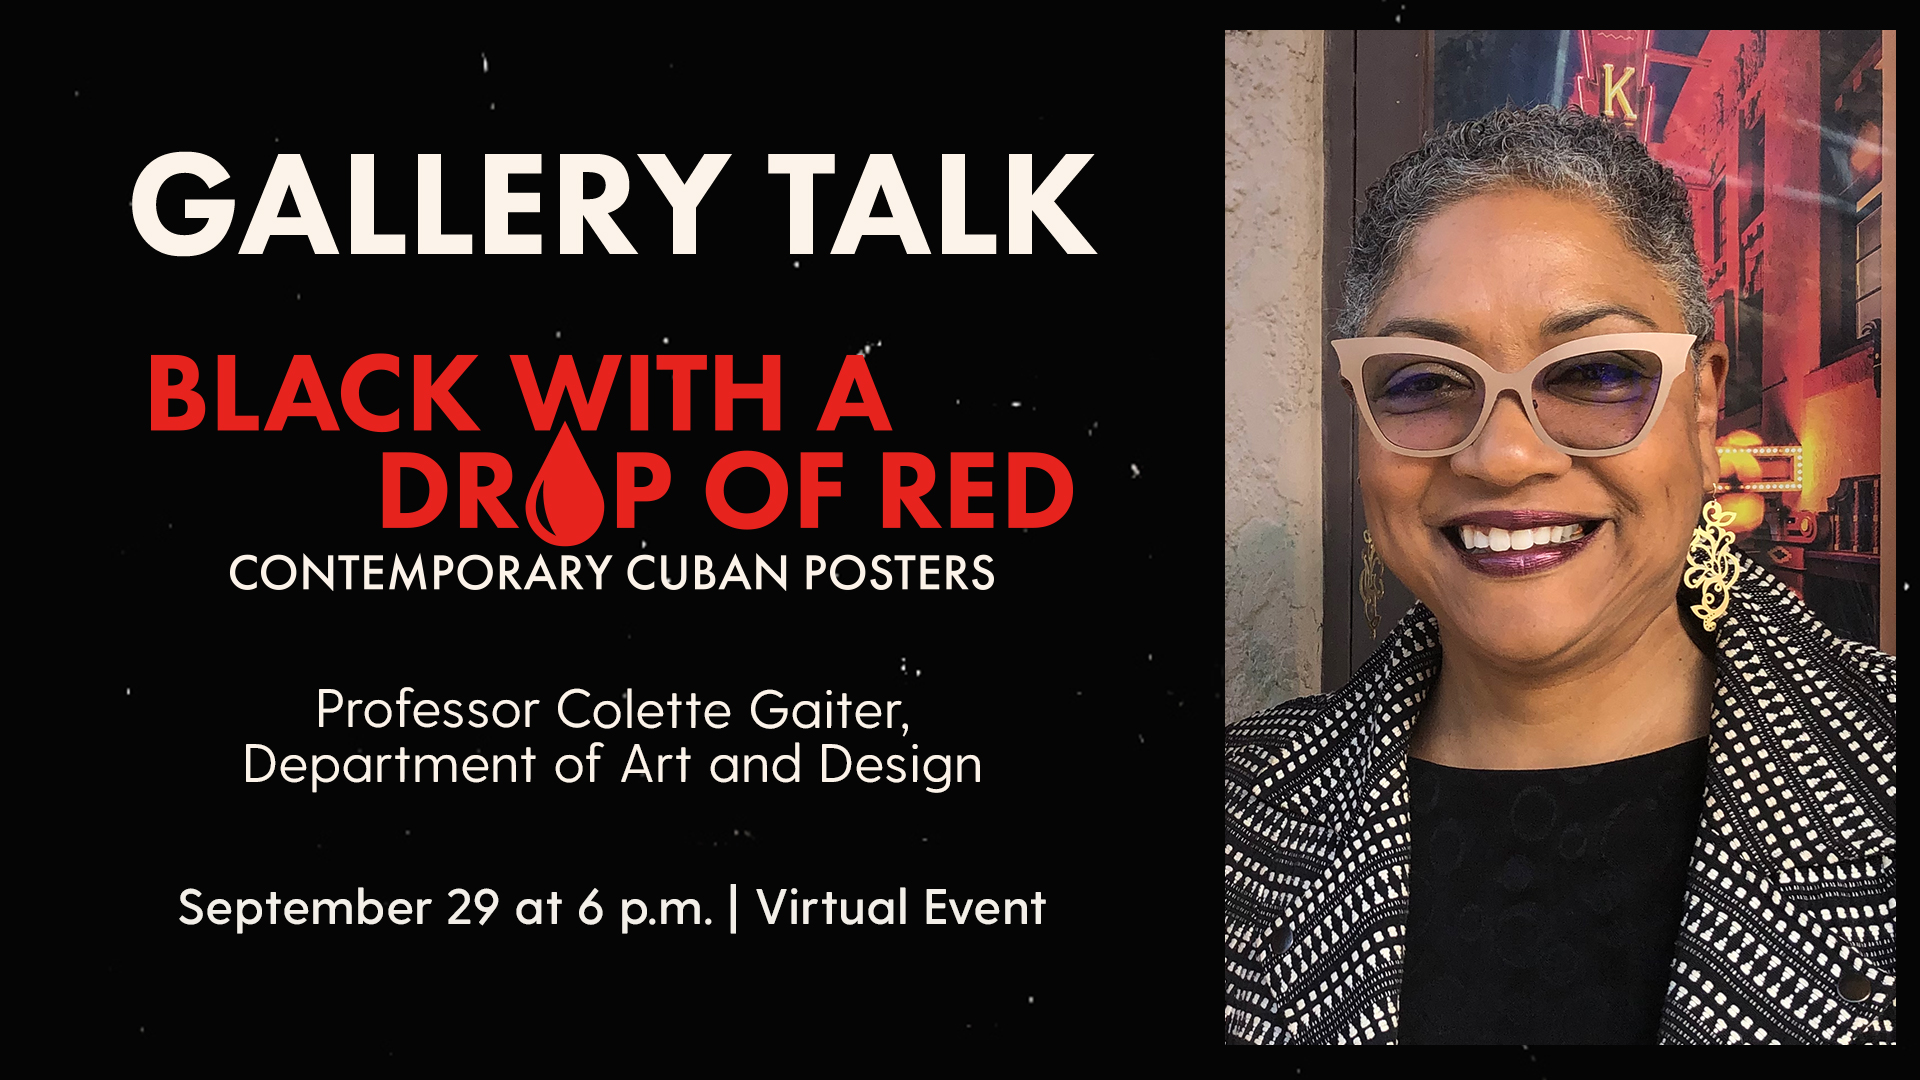 Promotional image for the Gallery Talk on 